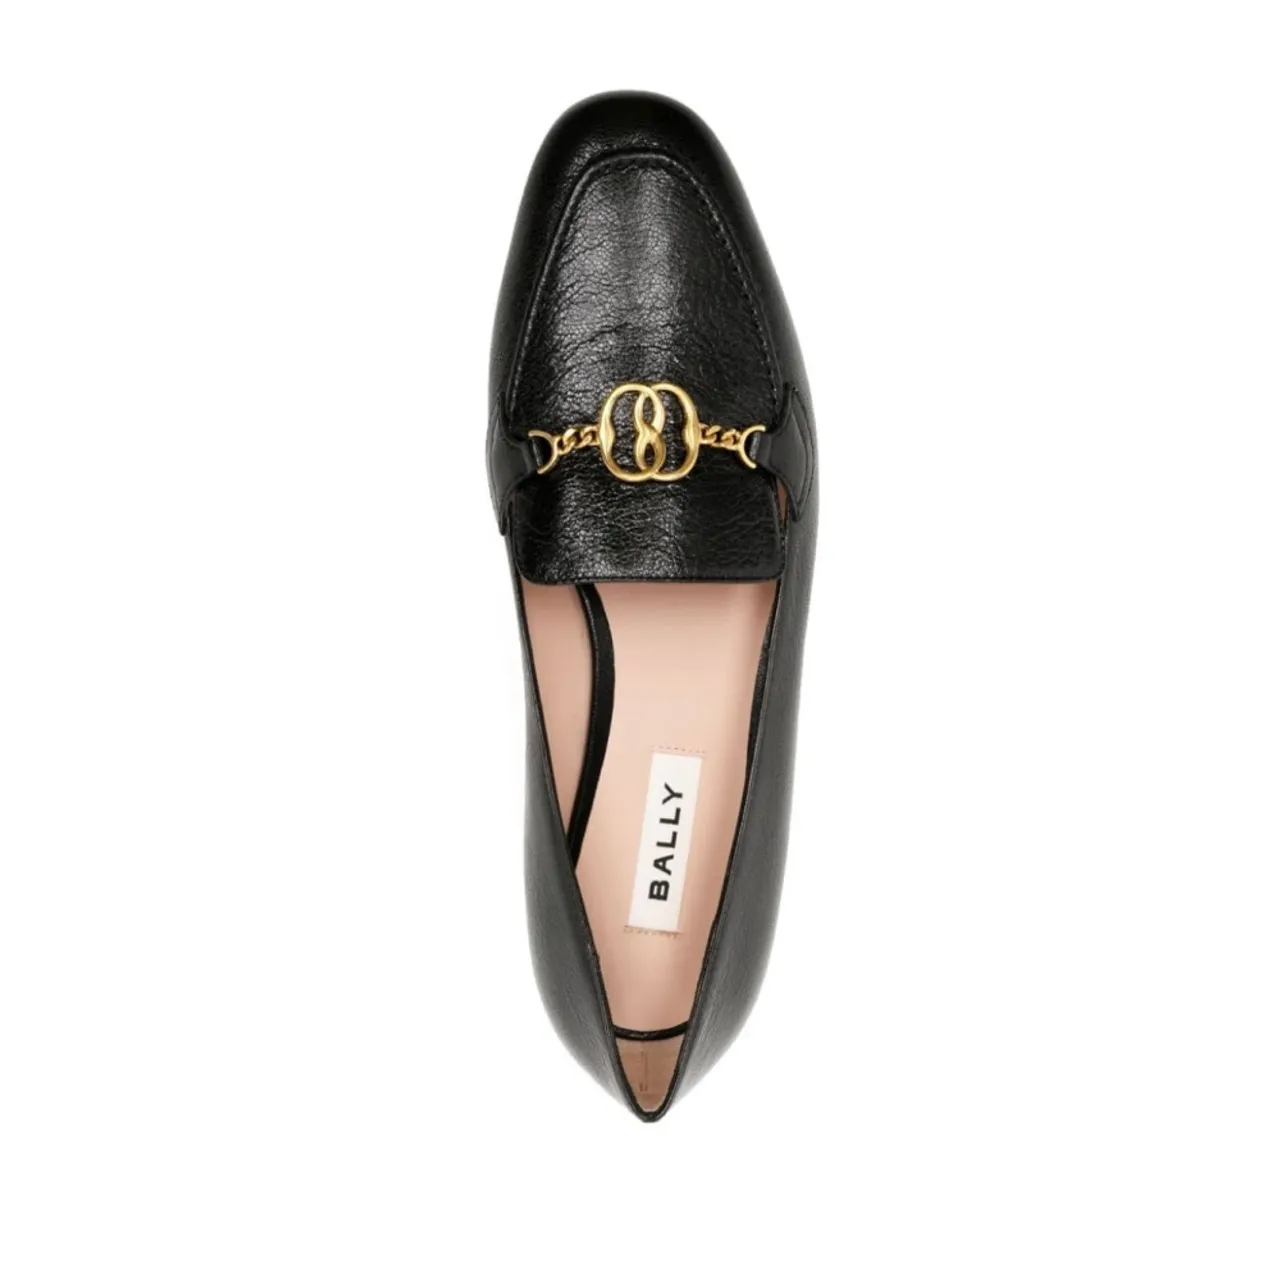 Bally , Women's Shoes Loafers U901 Aw22 ,Black female, Sizes: